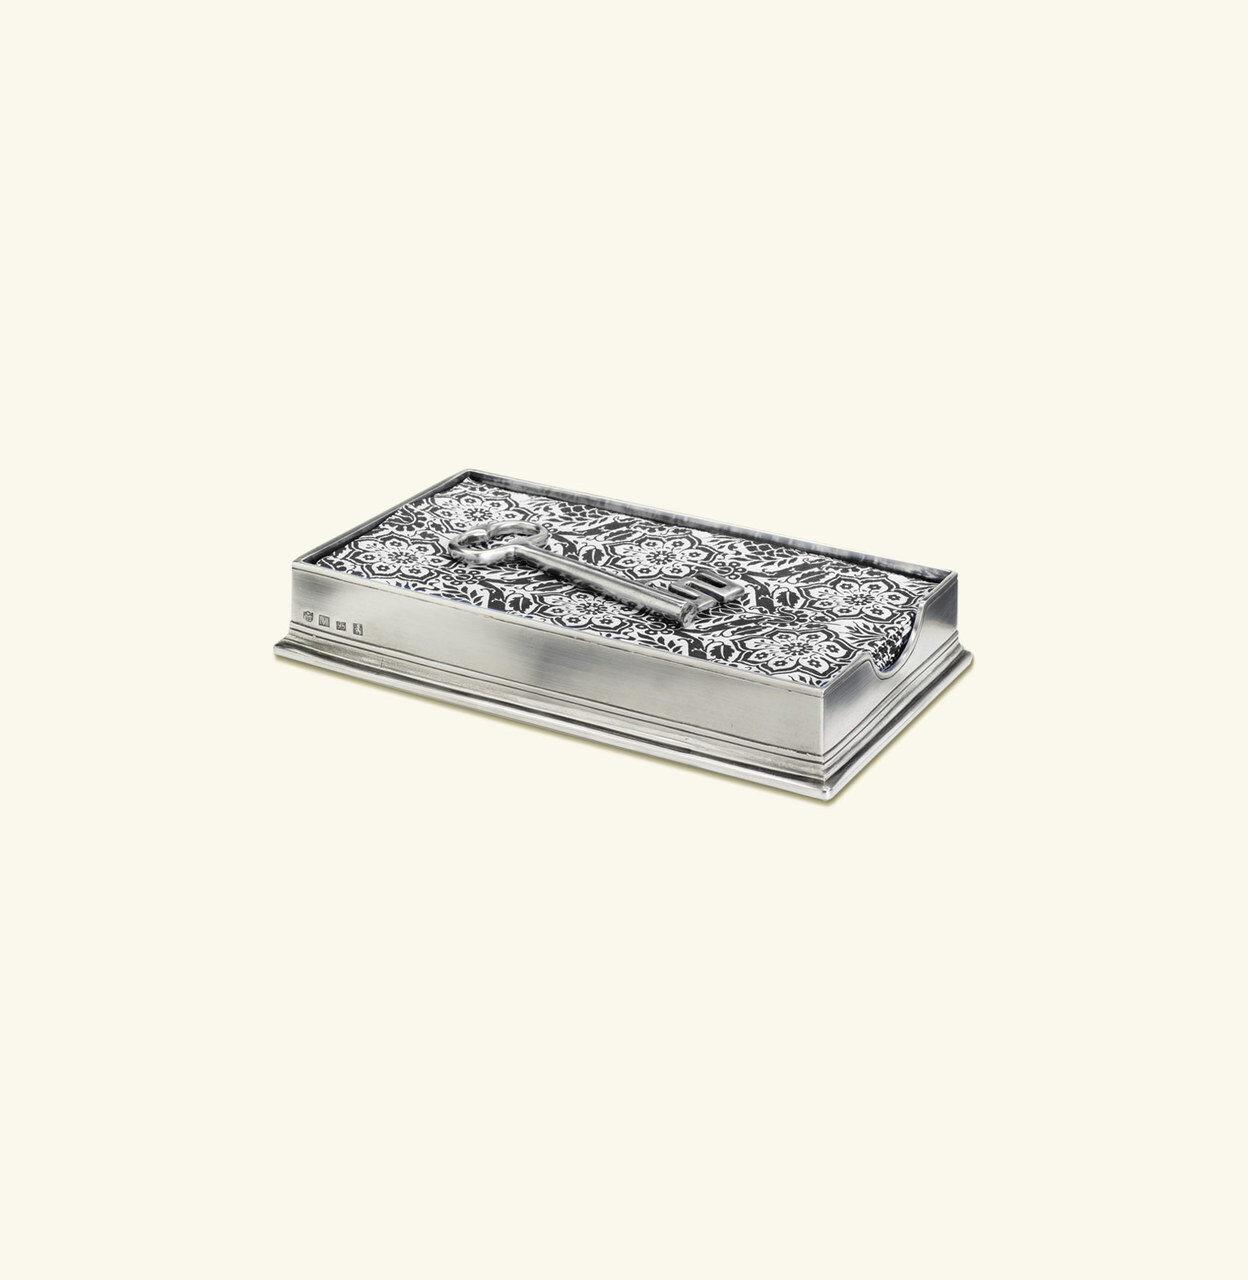 Match Pewter Dinner Napkin/Guest Towel Box With Key Weight 1284.1